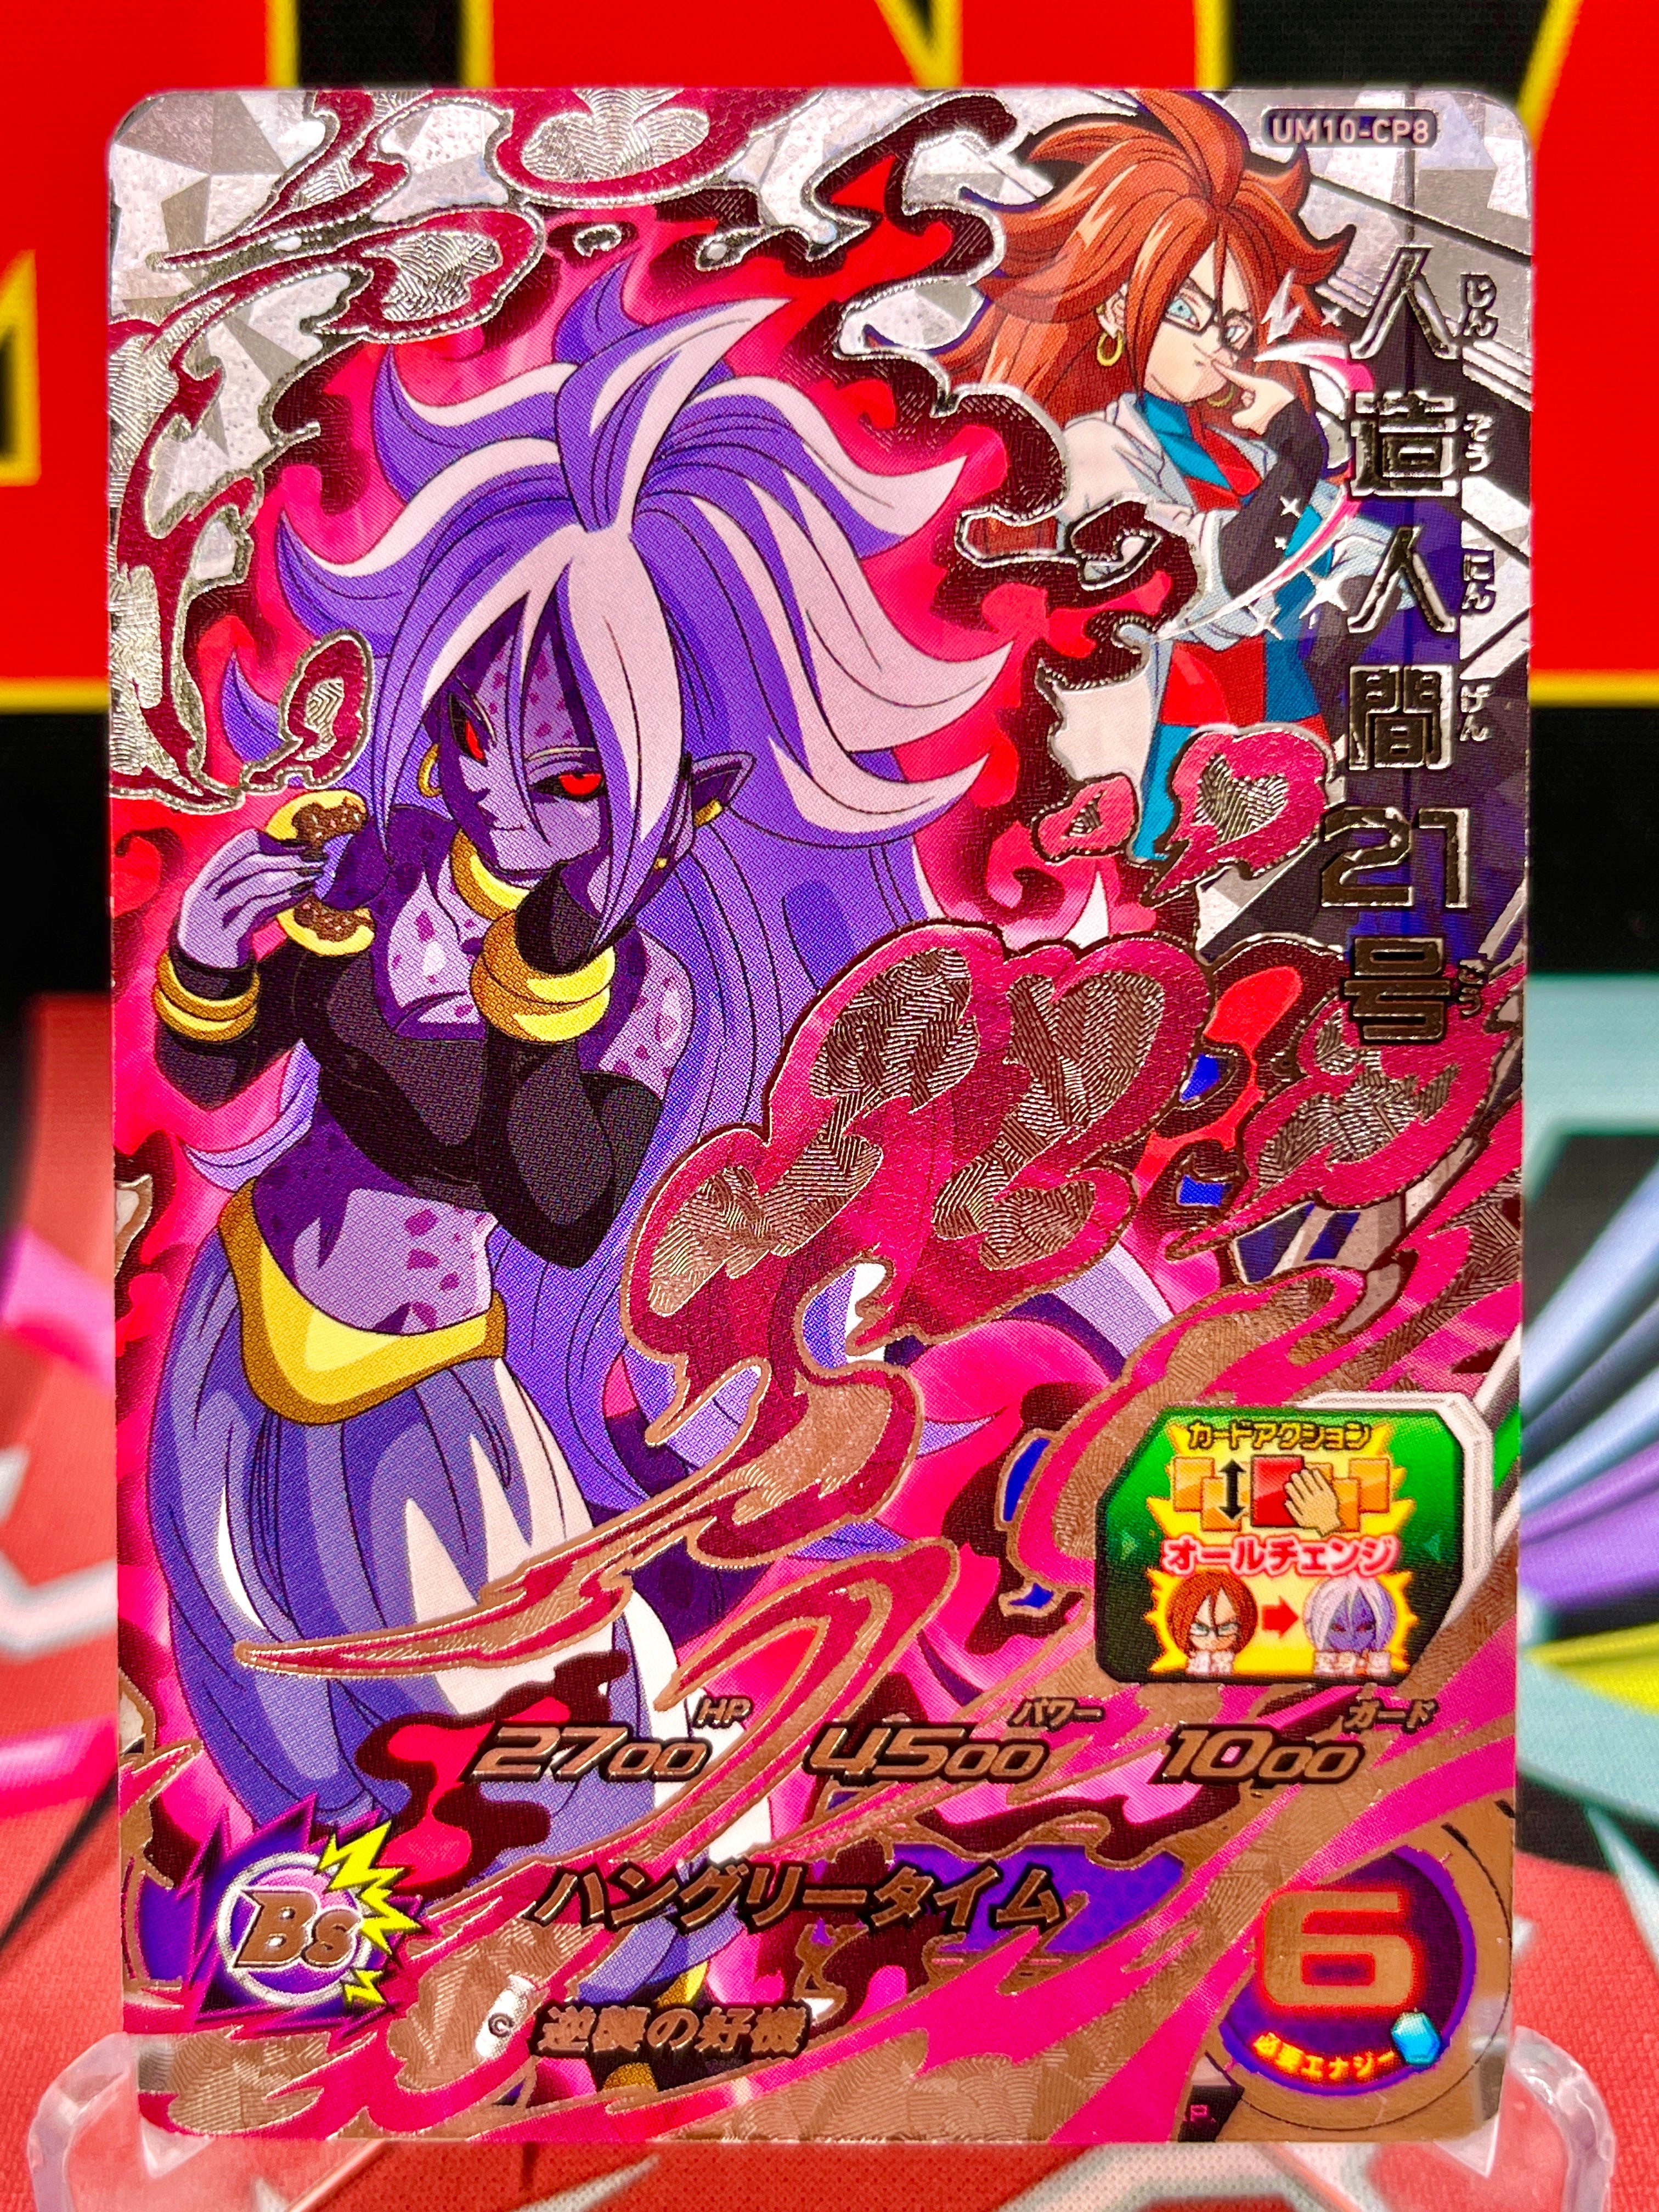 UM10-CP8 Android 21 CP (2019)